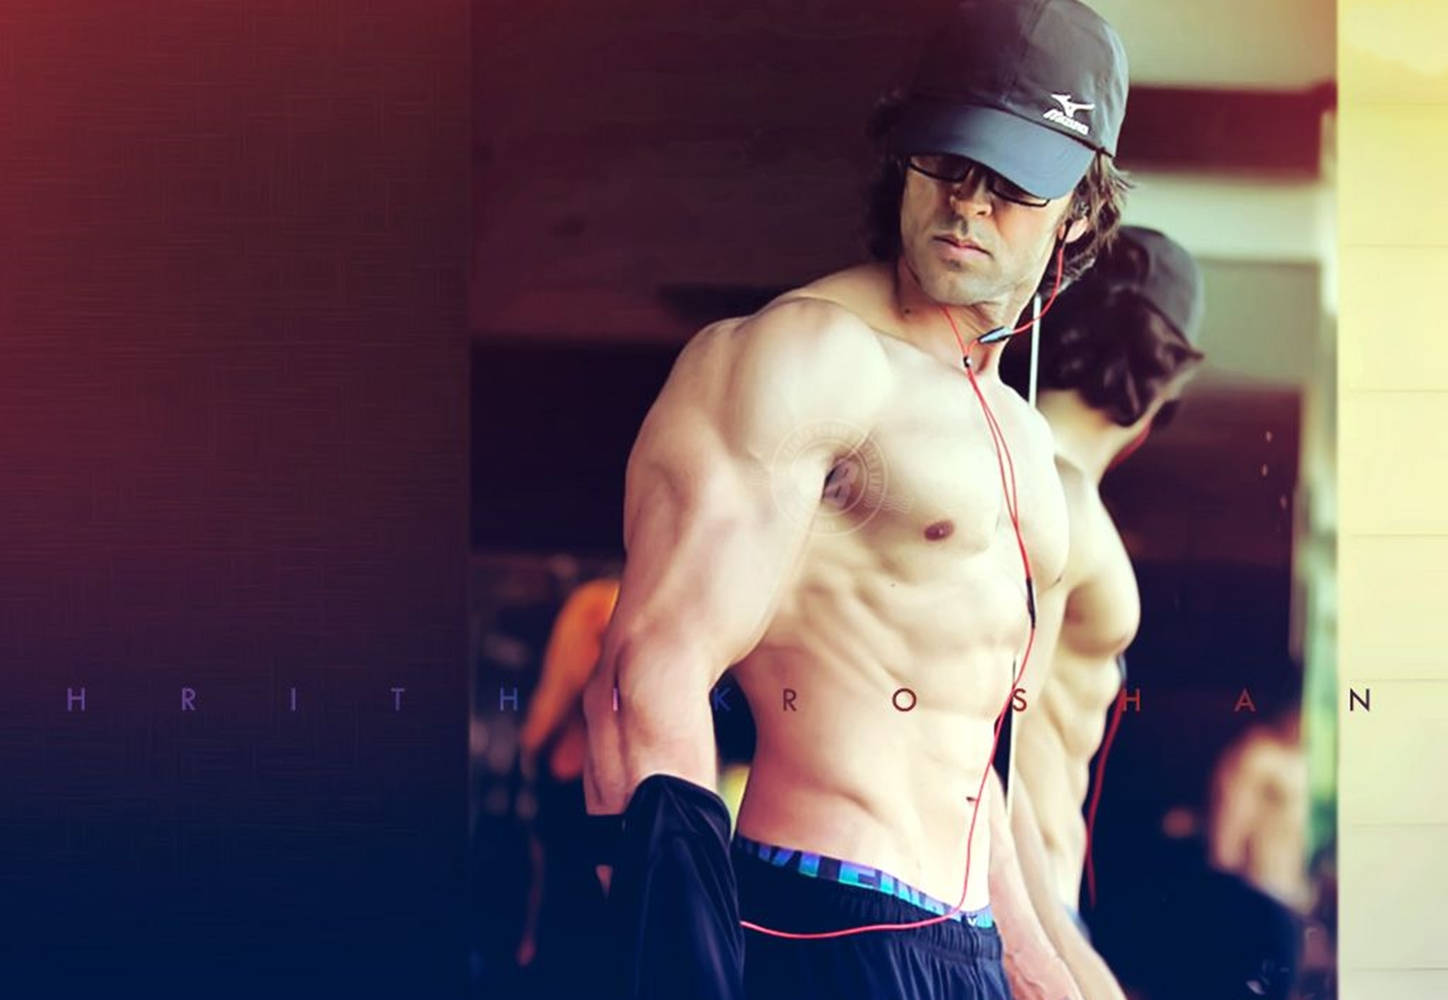 Hrithik Roshan Body Working Out At Gym Wallpaper